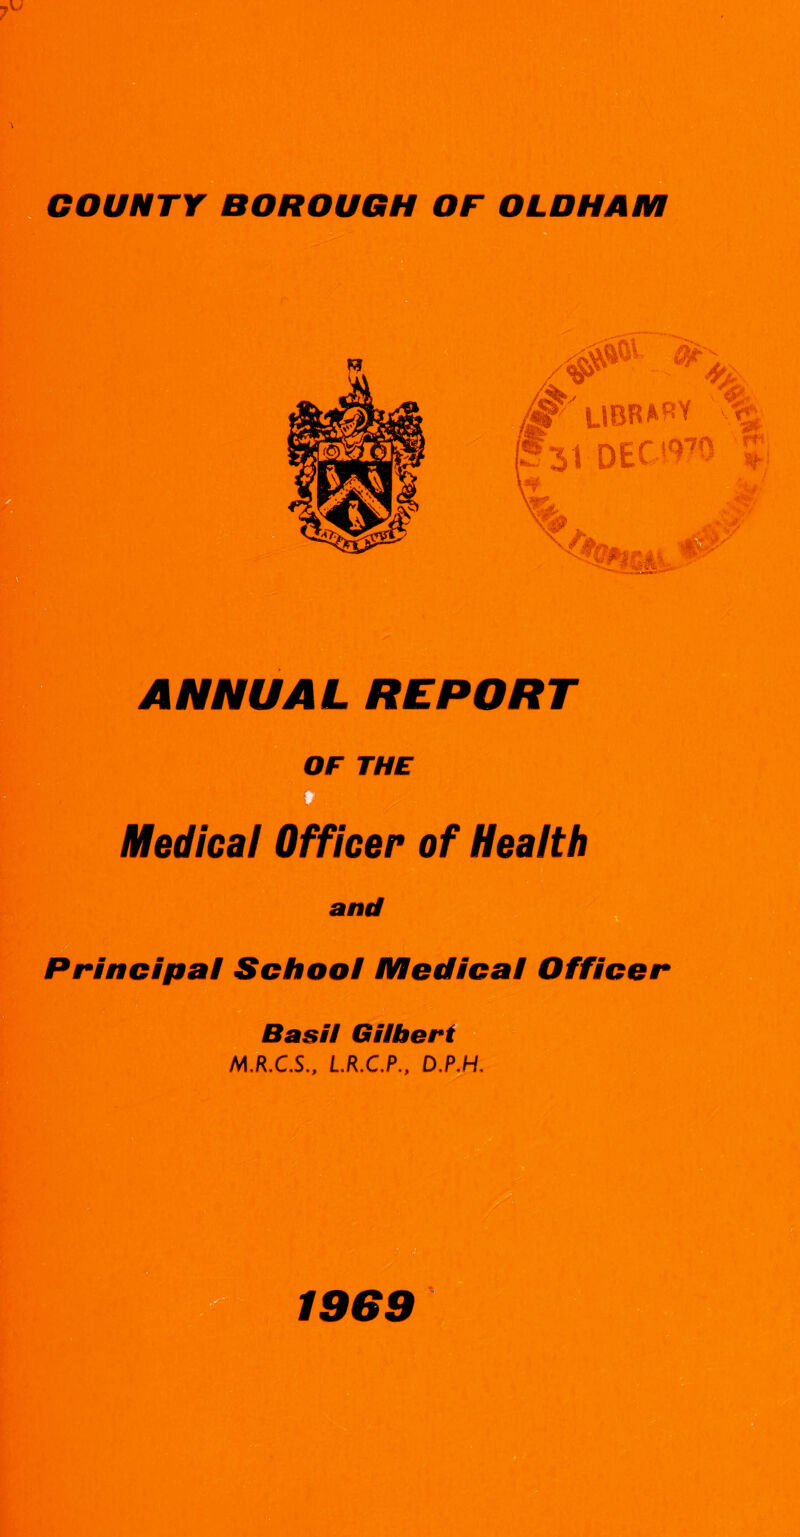 OF THE Medical Officer of Health and Principal School Medical Officer Basil Gilbert M.R.CS., L.R.C.P., O.P.H.